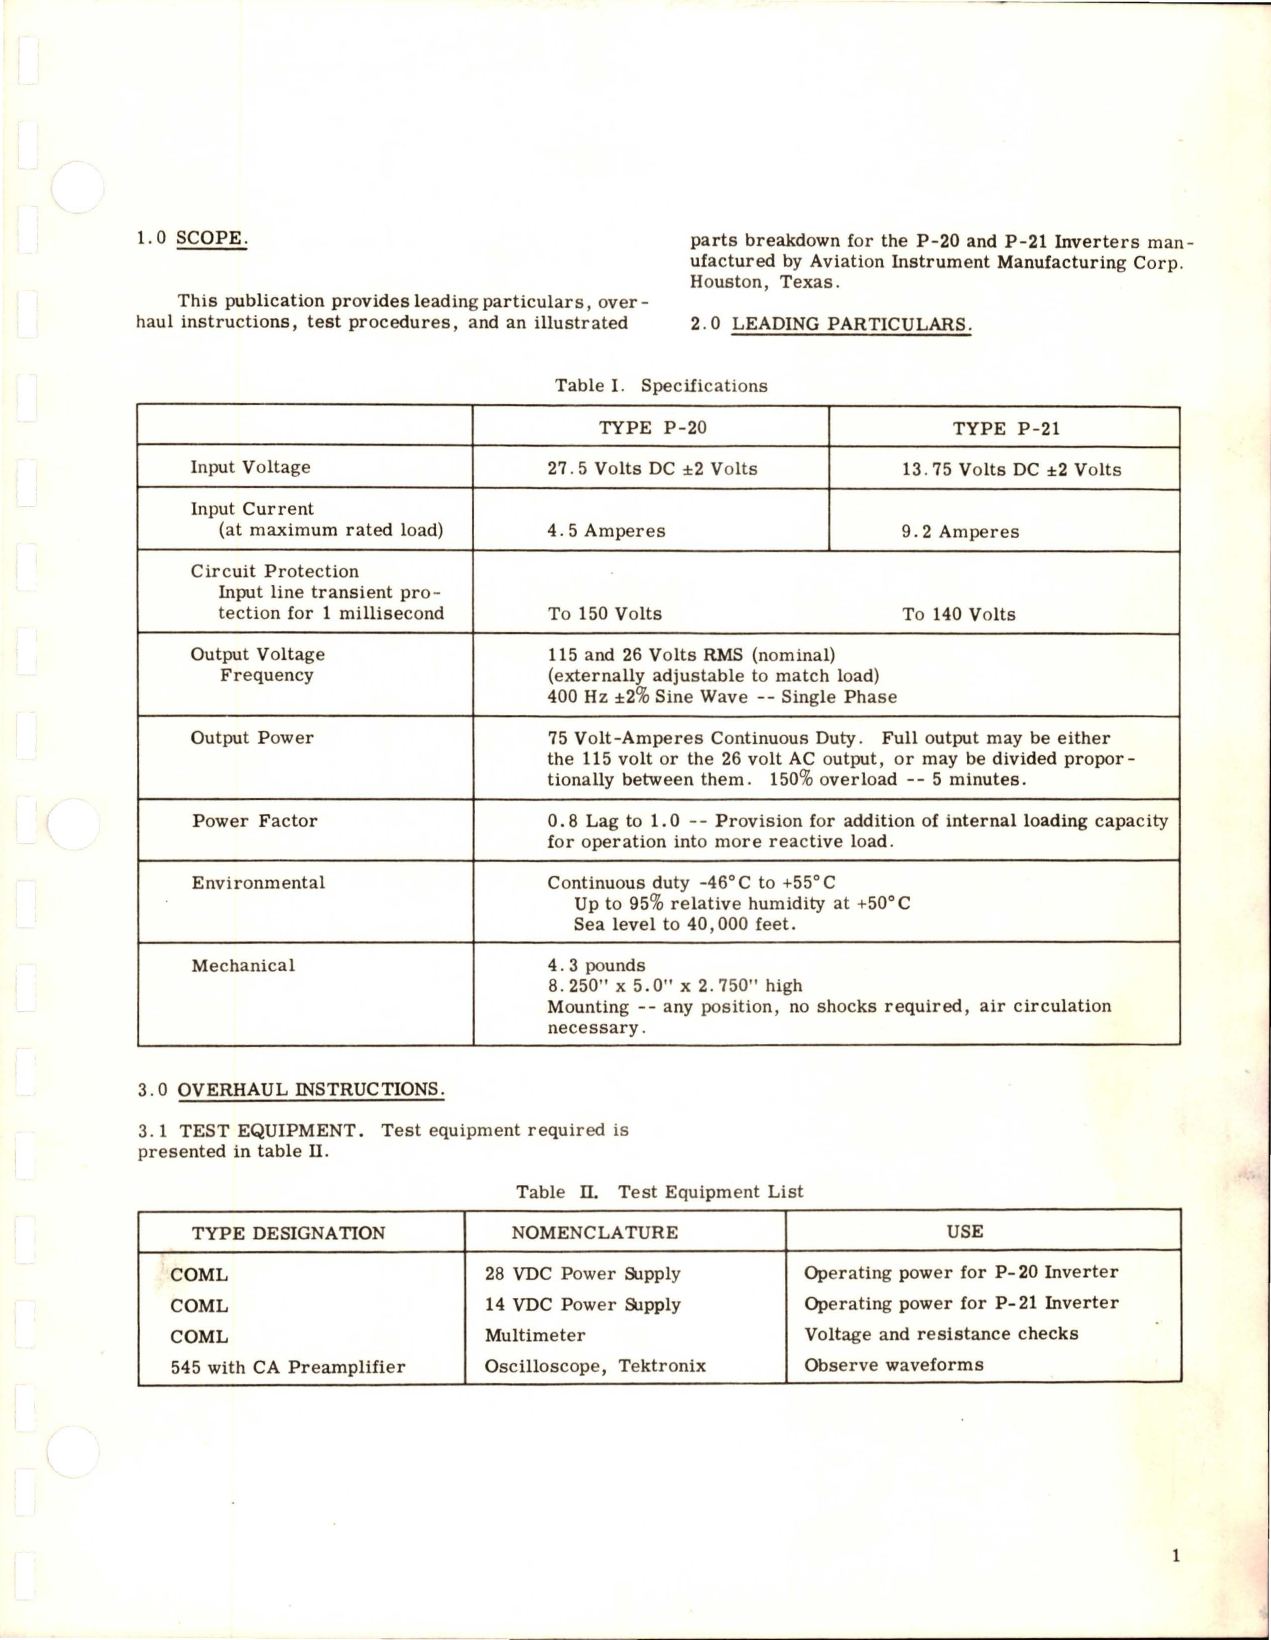 Sample page 5 from AirCorps Library document: Overhaul Instructions with Parts Breakdown for Inverters - AIM P-20, P-21